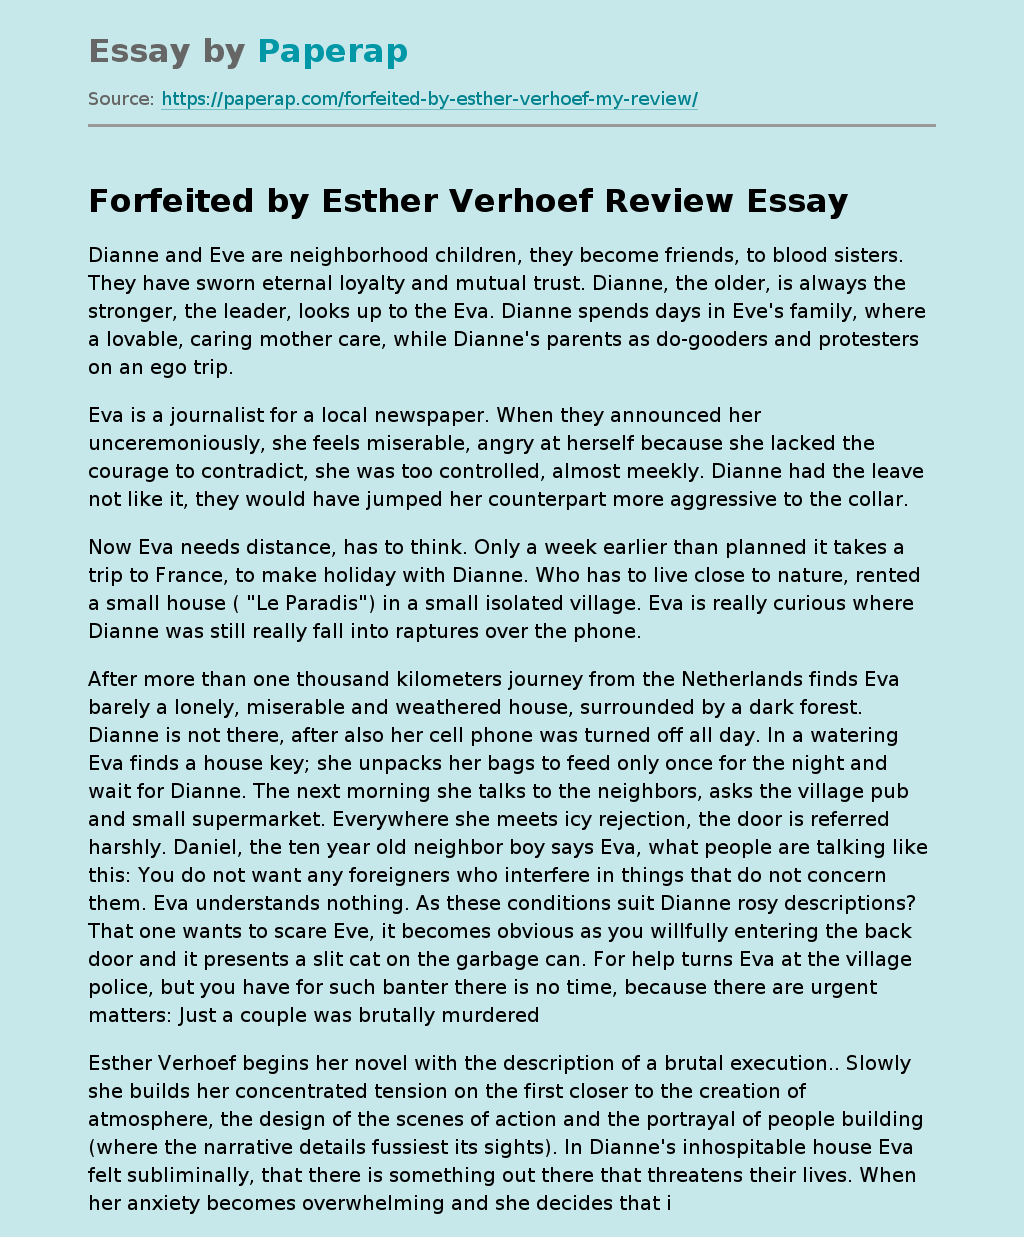 Book "Forfeited" by Esther Verhoef